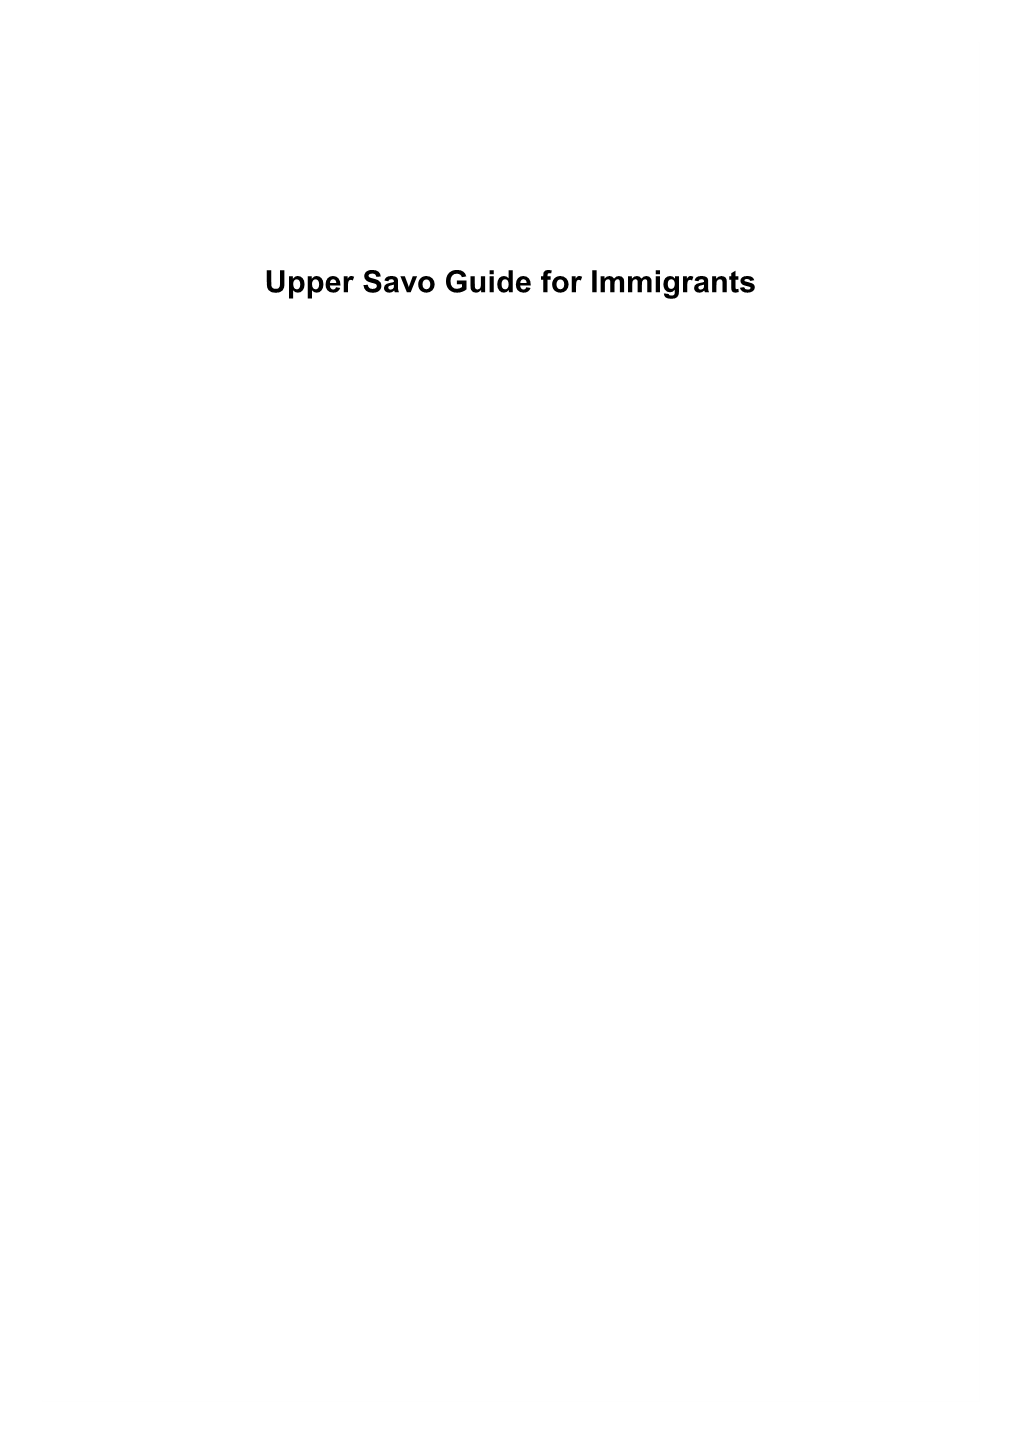 Upper Savo Guide for Immigrants